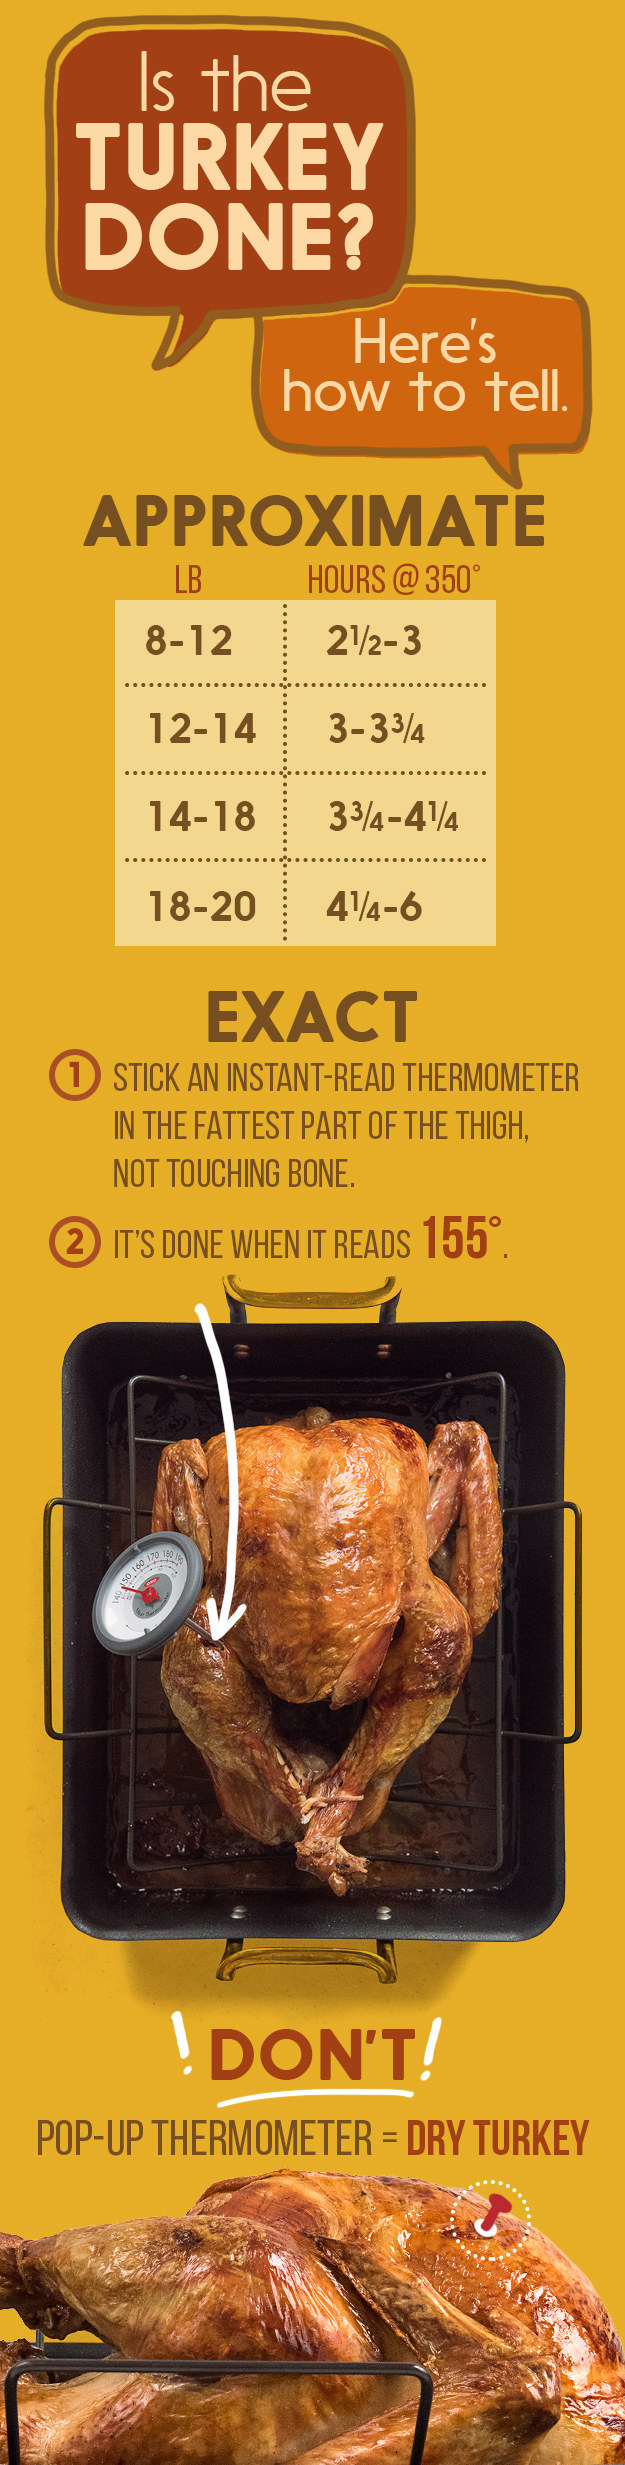 For knowing when to pull the bird out of the oven: